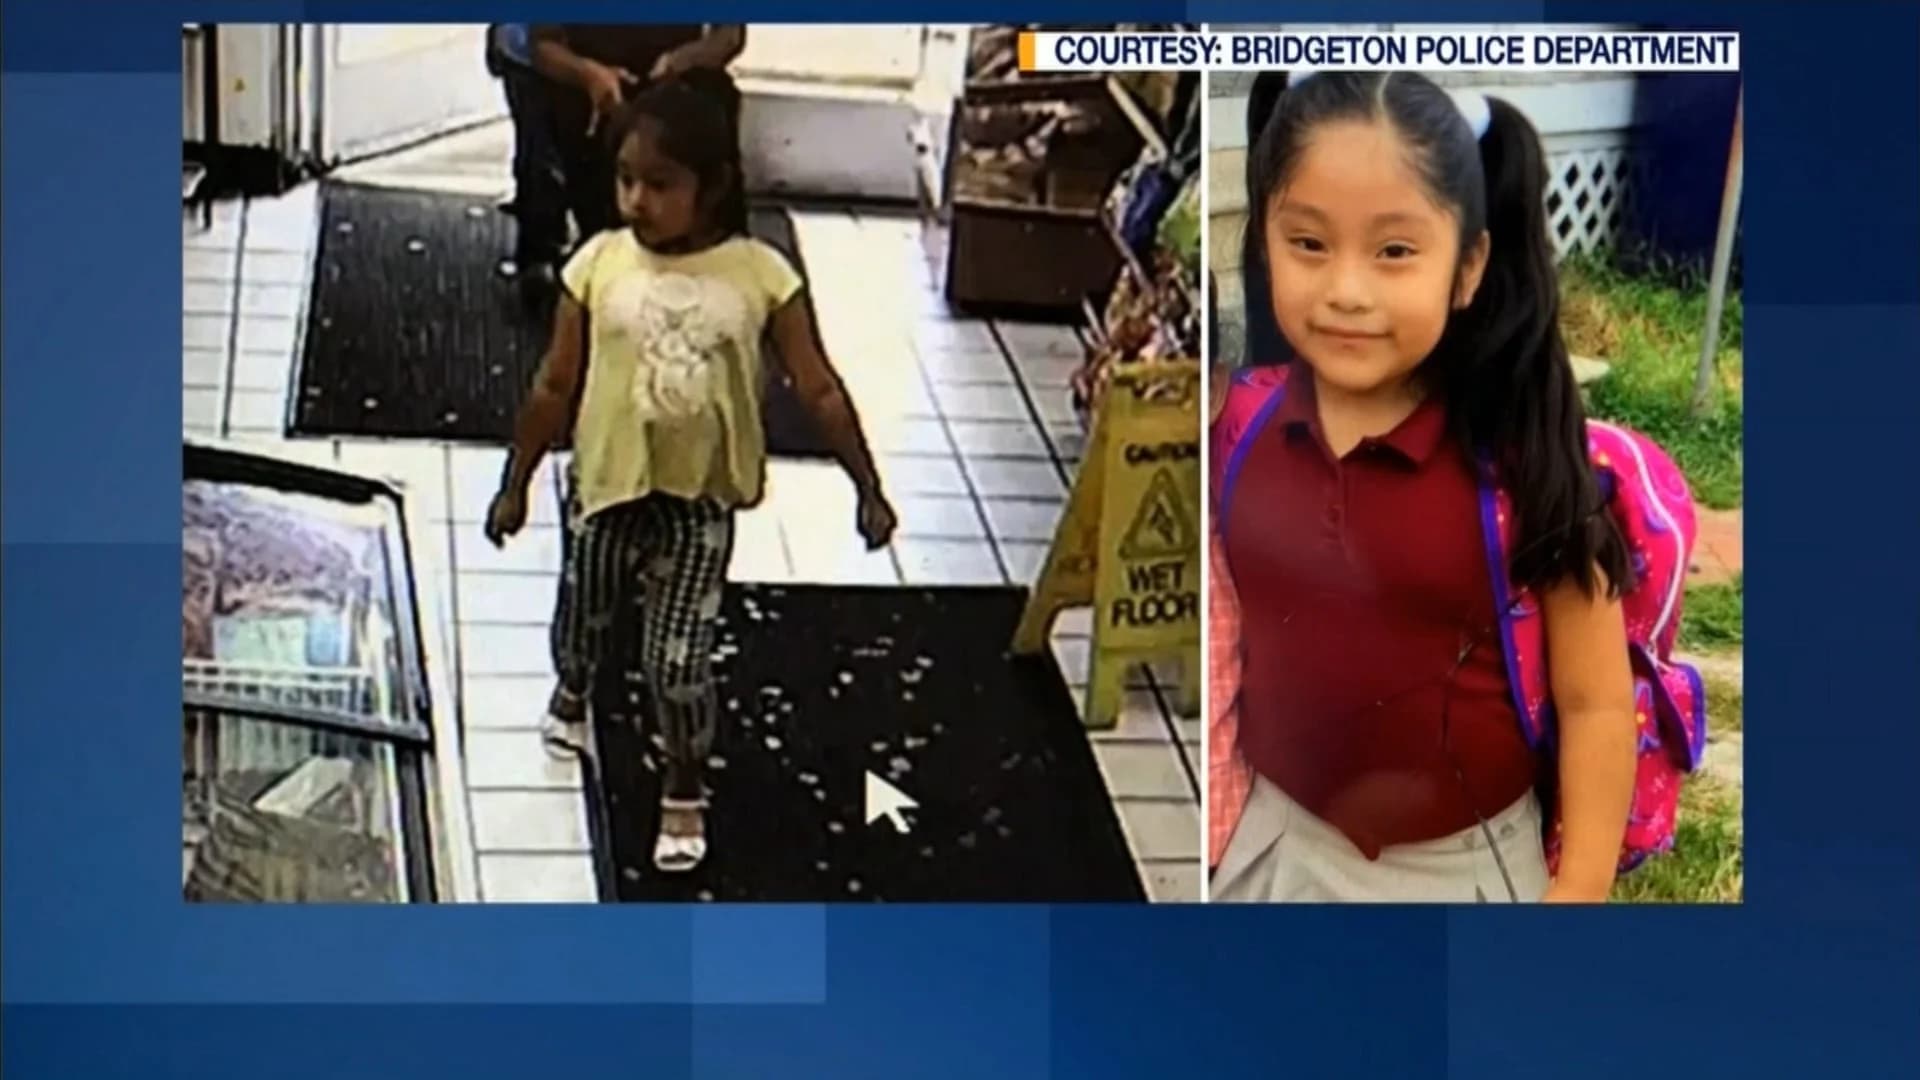 FBI joins the search for girl believed to be abducted from Bridgeton park